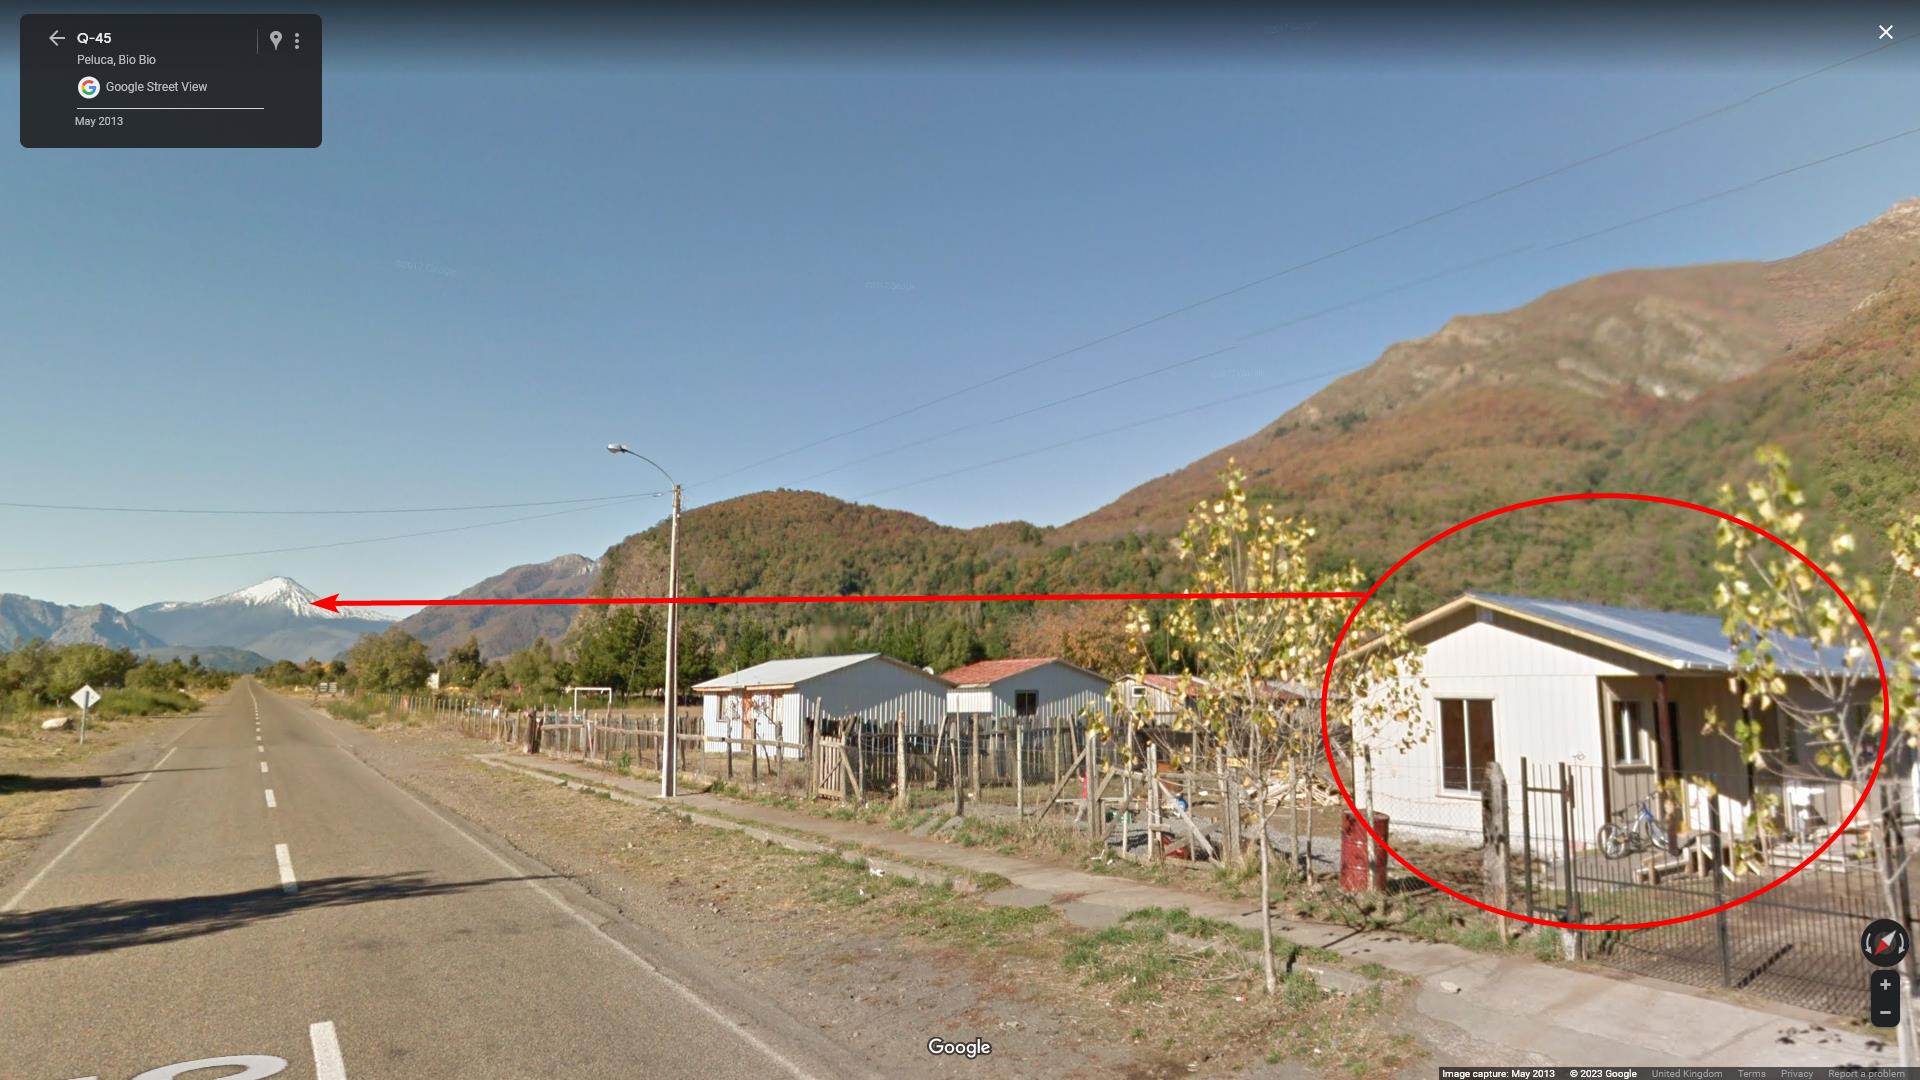 An image taken from google maps street view showing a red circle around a house or small building, and an arrow coming from that circle pointing towards Volcano Antuco